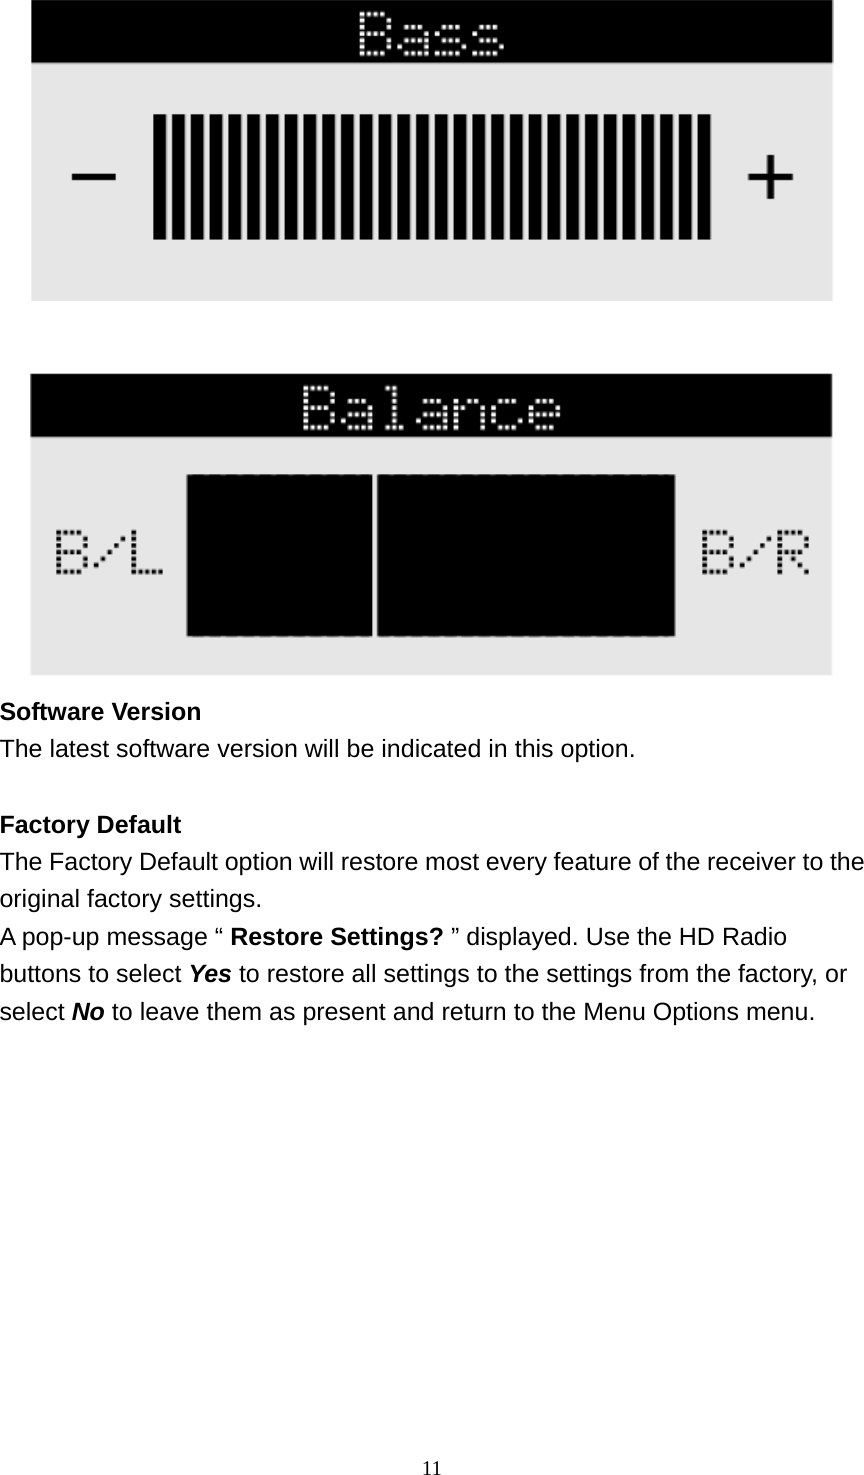  11   Software Version The latest software version will be indicated in this option.  Factory Default The Factory Default option will restore most every feature of the receiver to the original factory settings.   A pop-up message “ Restore Settings? ” displayed. Use the HD Radio buttons to select Yes to restore all settings to the settings from the factory, or select No to leave them as present and return to the Menu Options menu. 